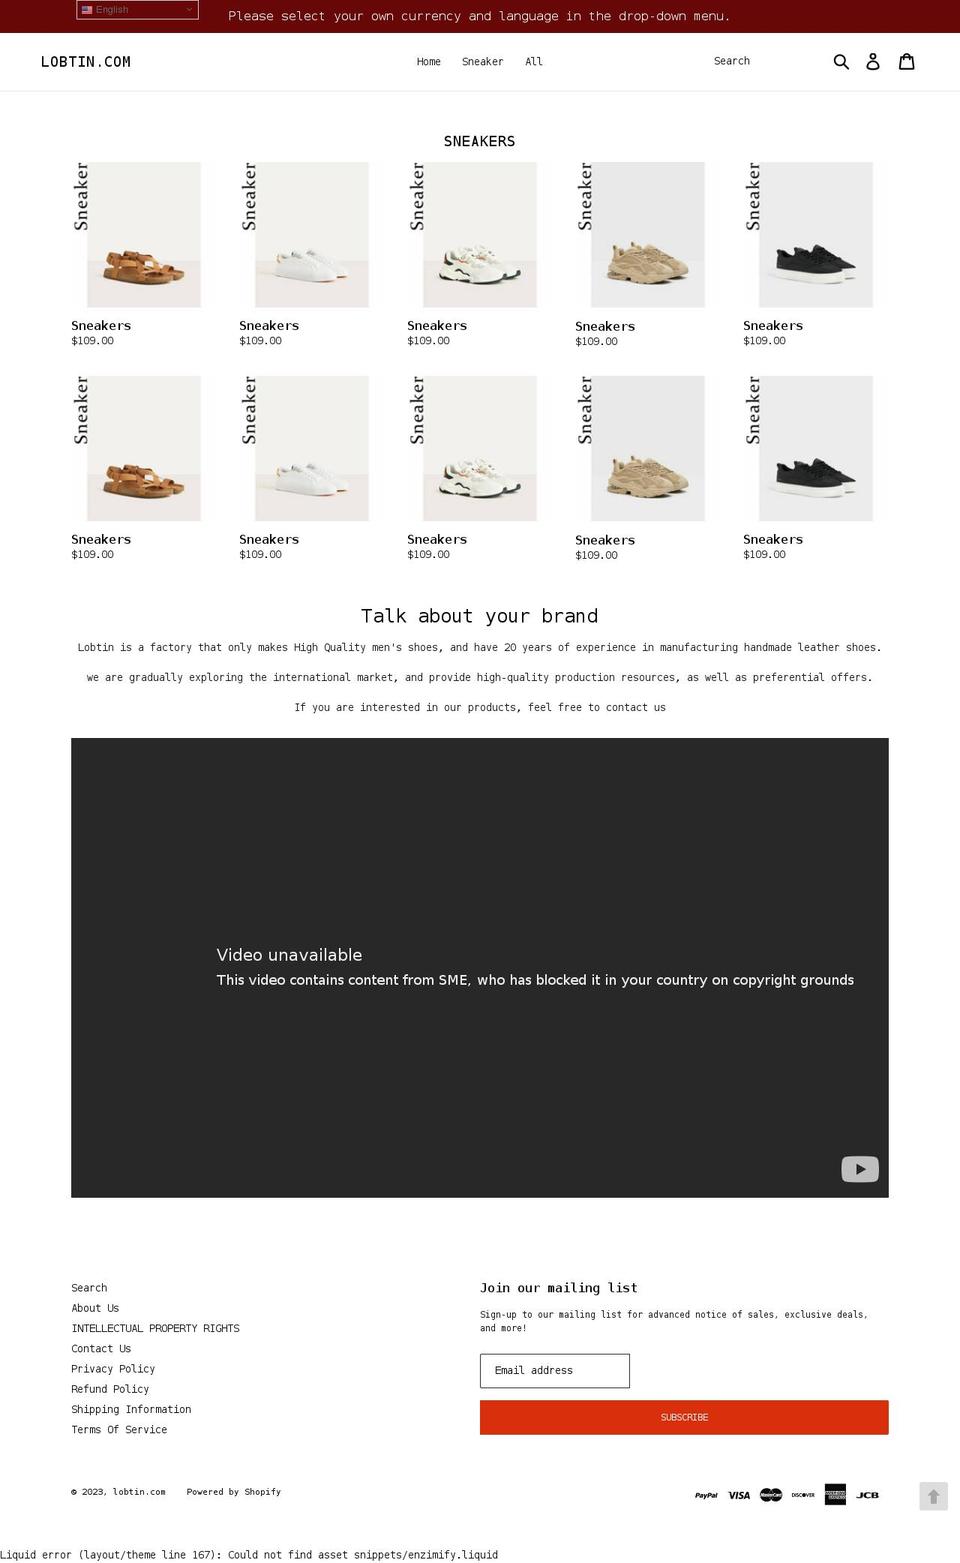 Sneaker Shopify theme site example newbmall.com